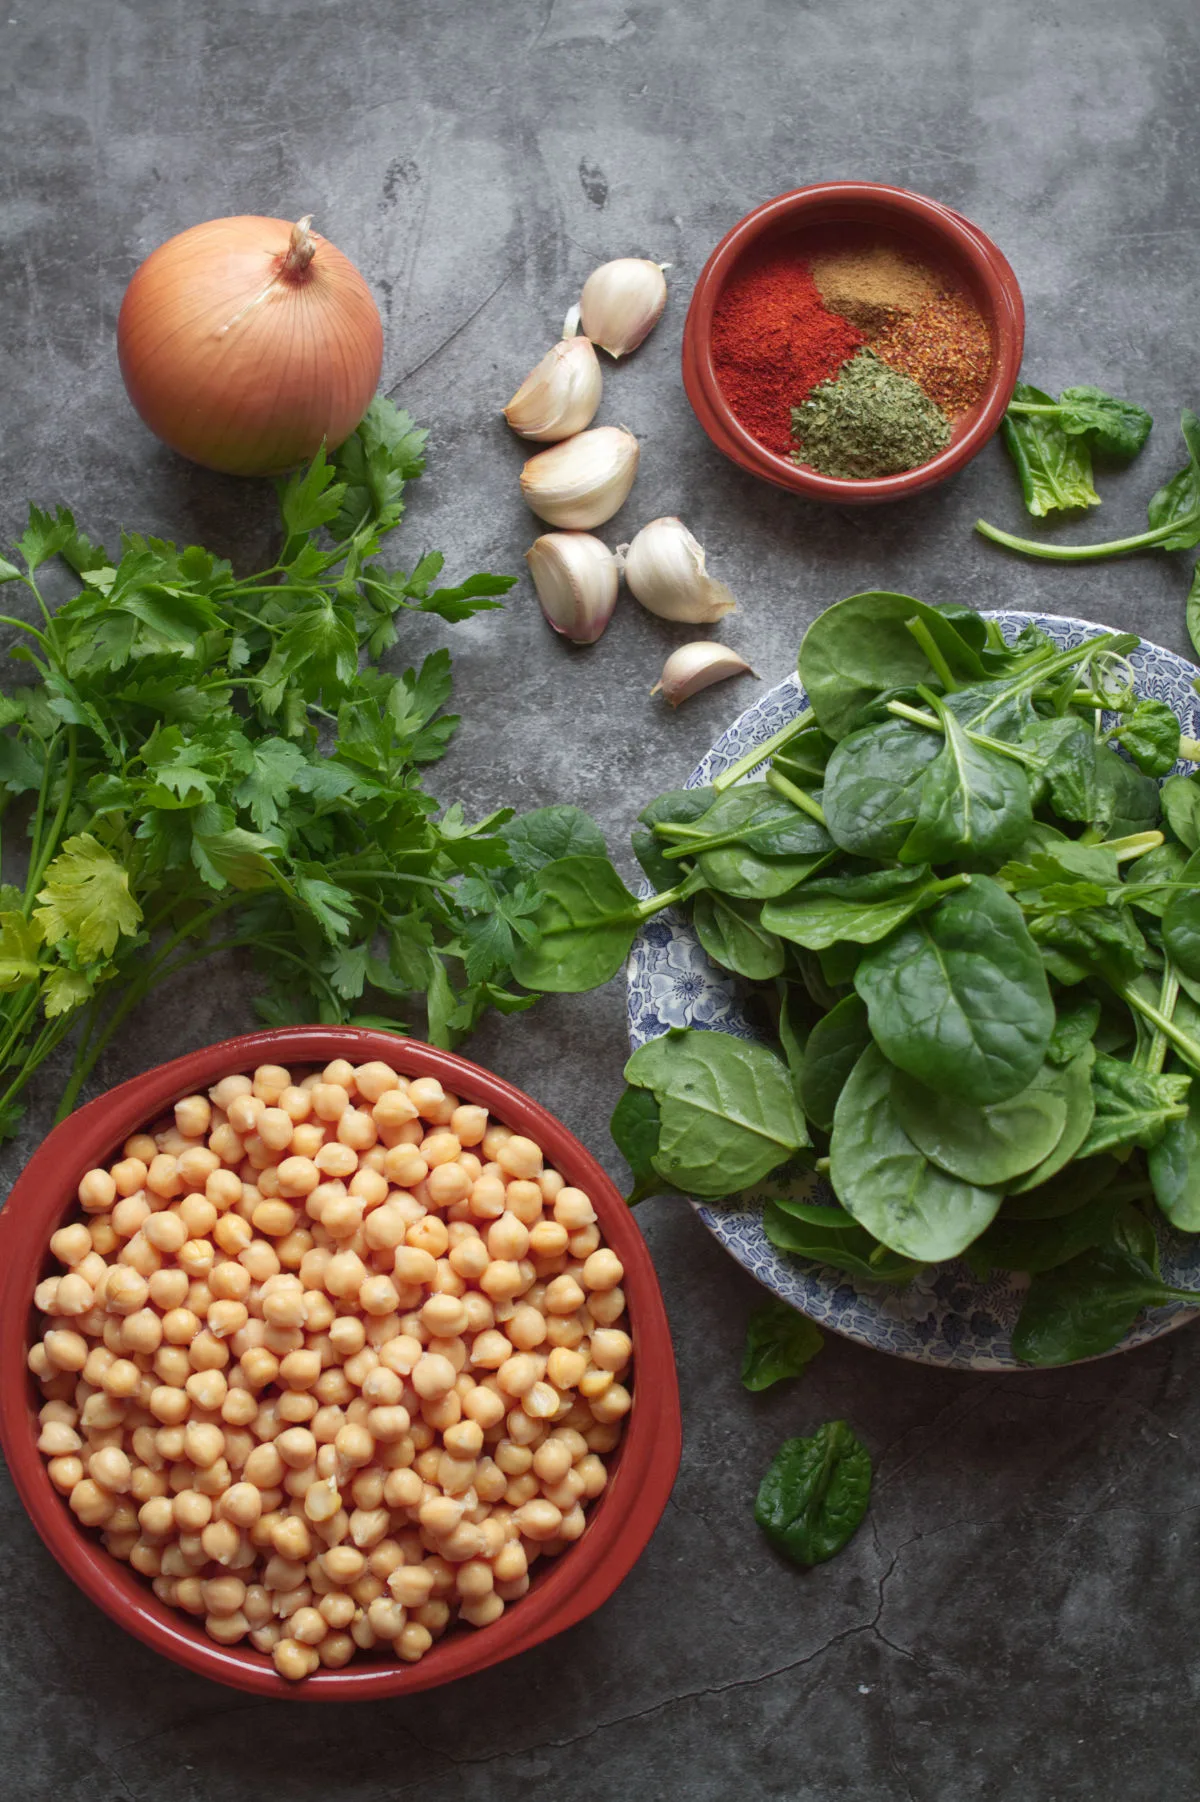 A alrge bowl of chickpeas sists beside a bowl of spinach, onion, garlic, and some herbs and spices. 